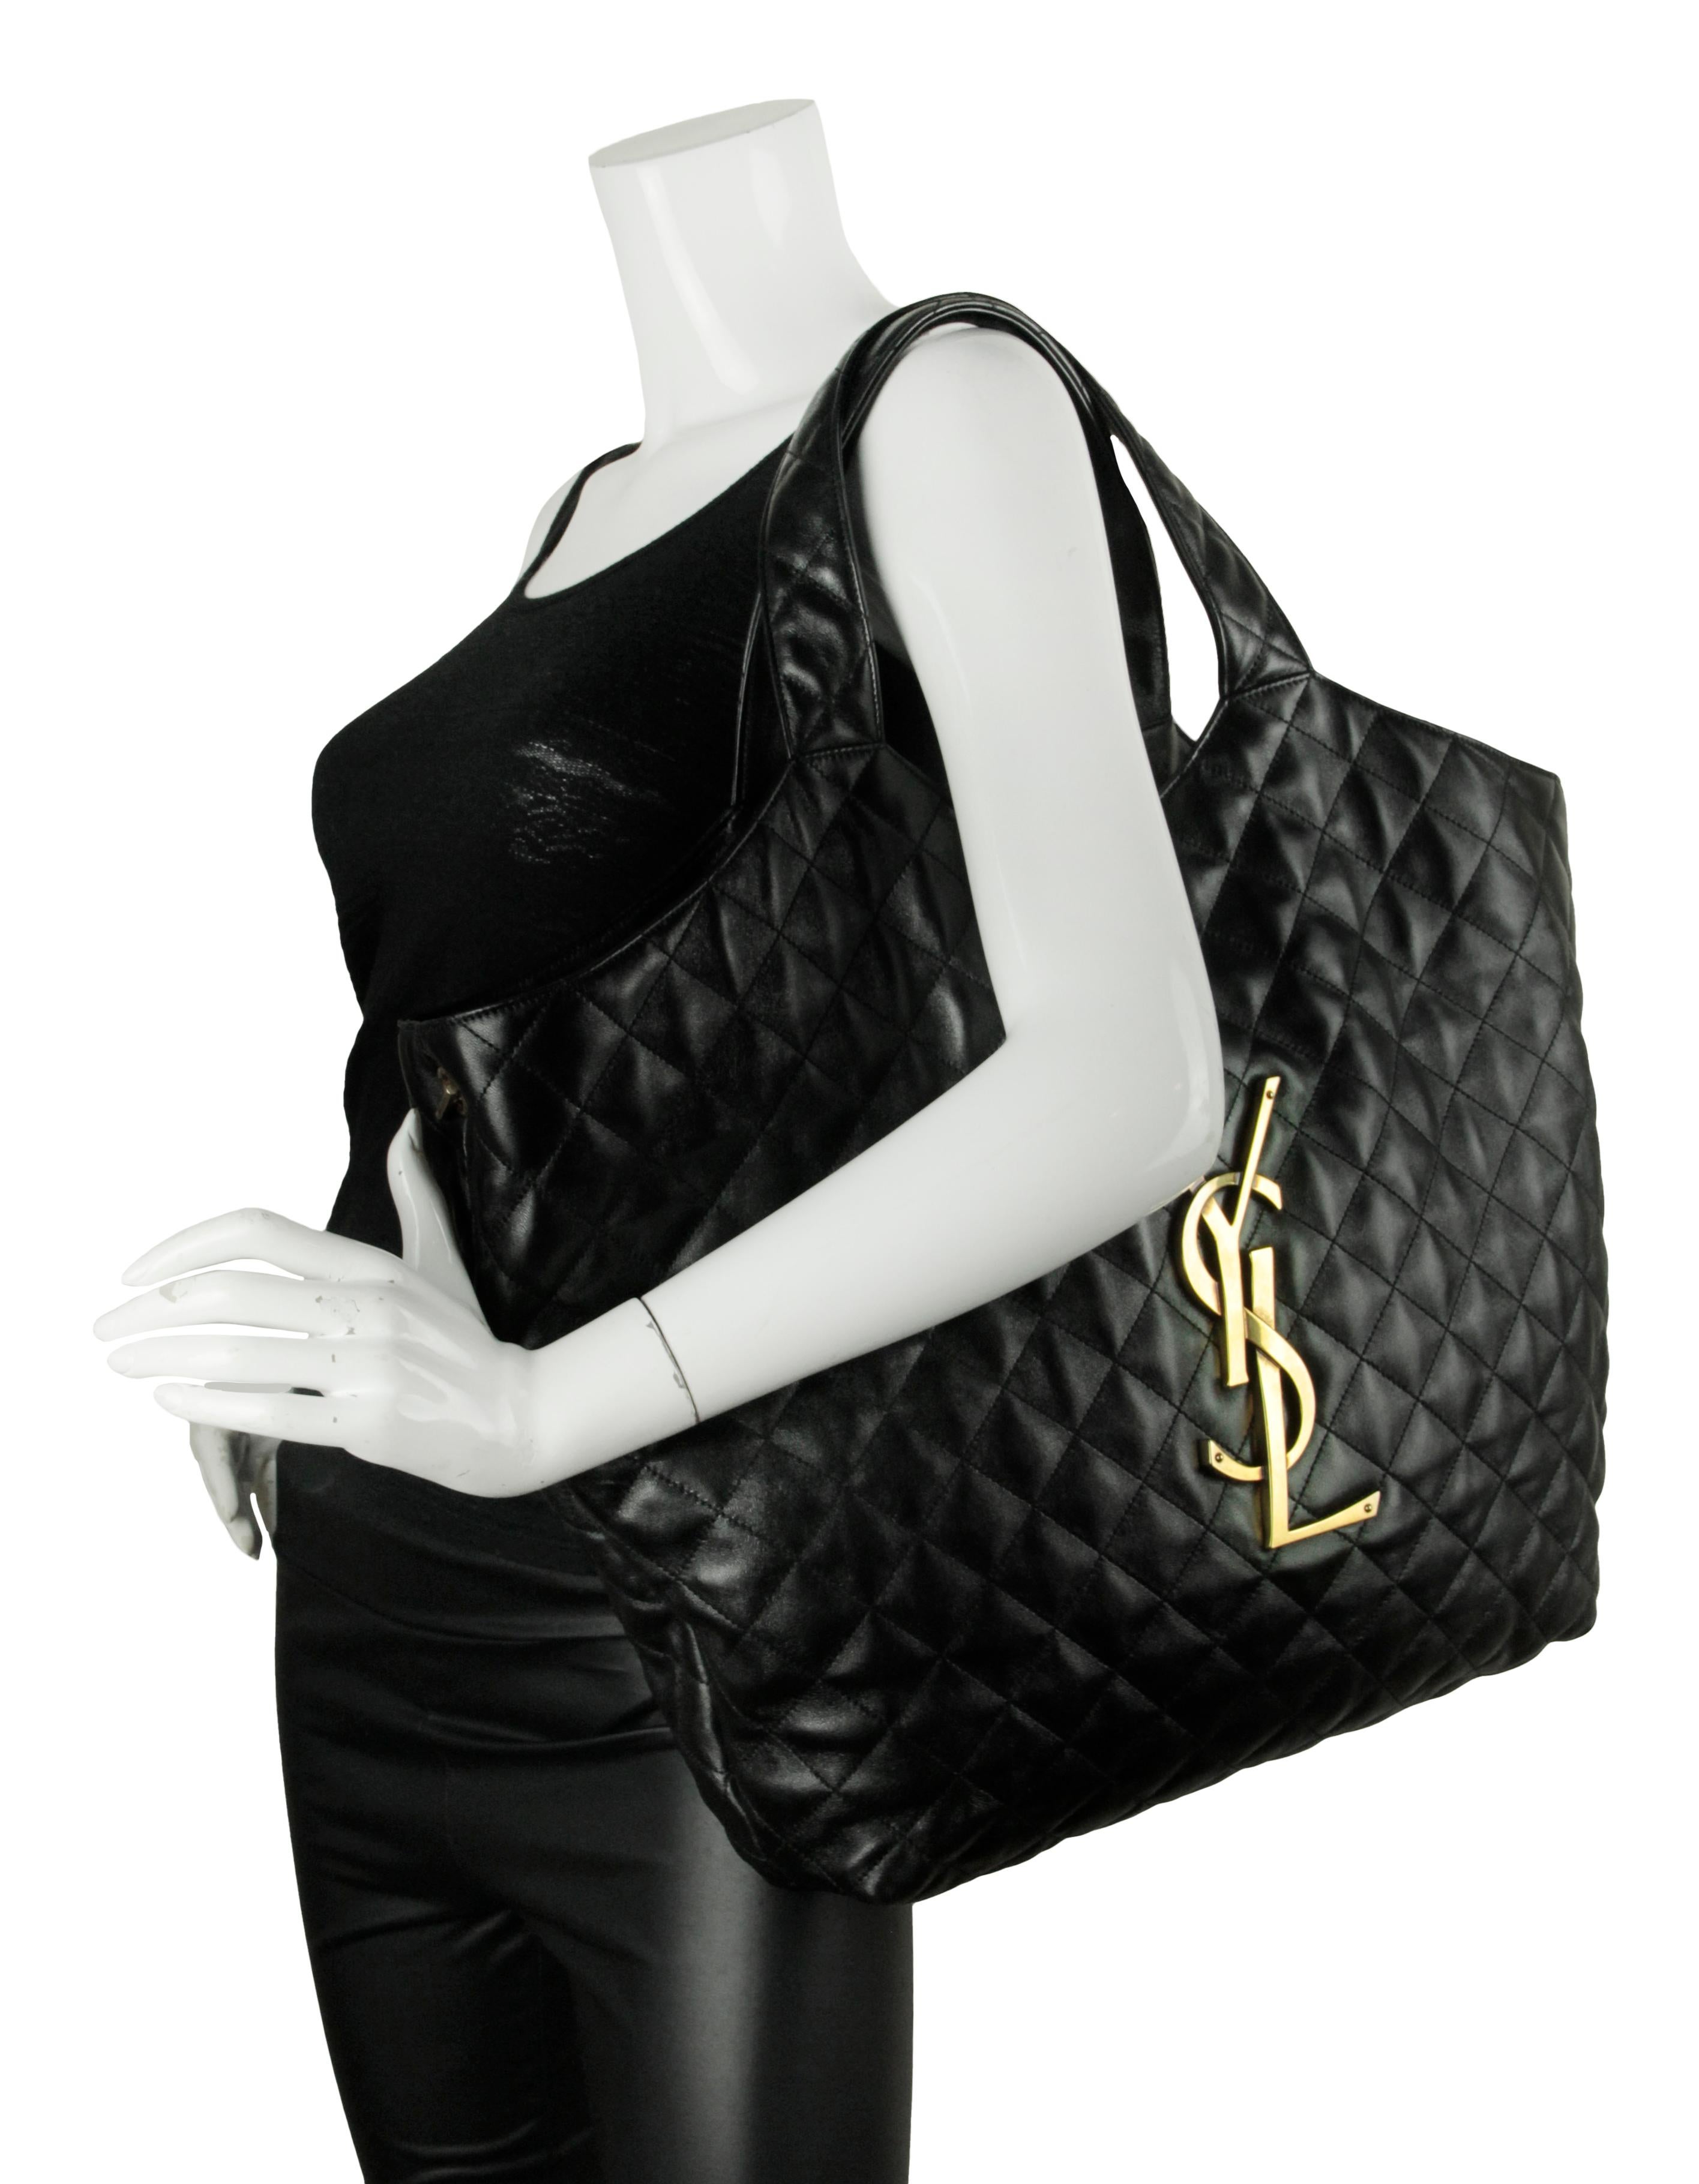 Saint Laurent Black Quilted Leather Icare Maxi Shopping Tote Bag. Includes leather zip top pouch. Can be worn wide or with closed sides

Made In: Italy
Color: Black
Hardware: Antiqued goldtone
Materials: Lambskin leather 
Lining: Black textile